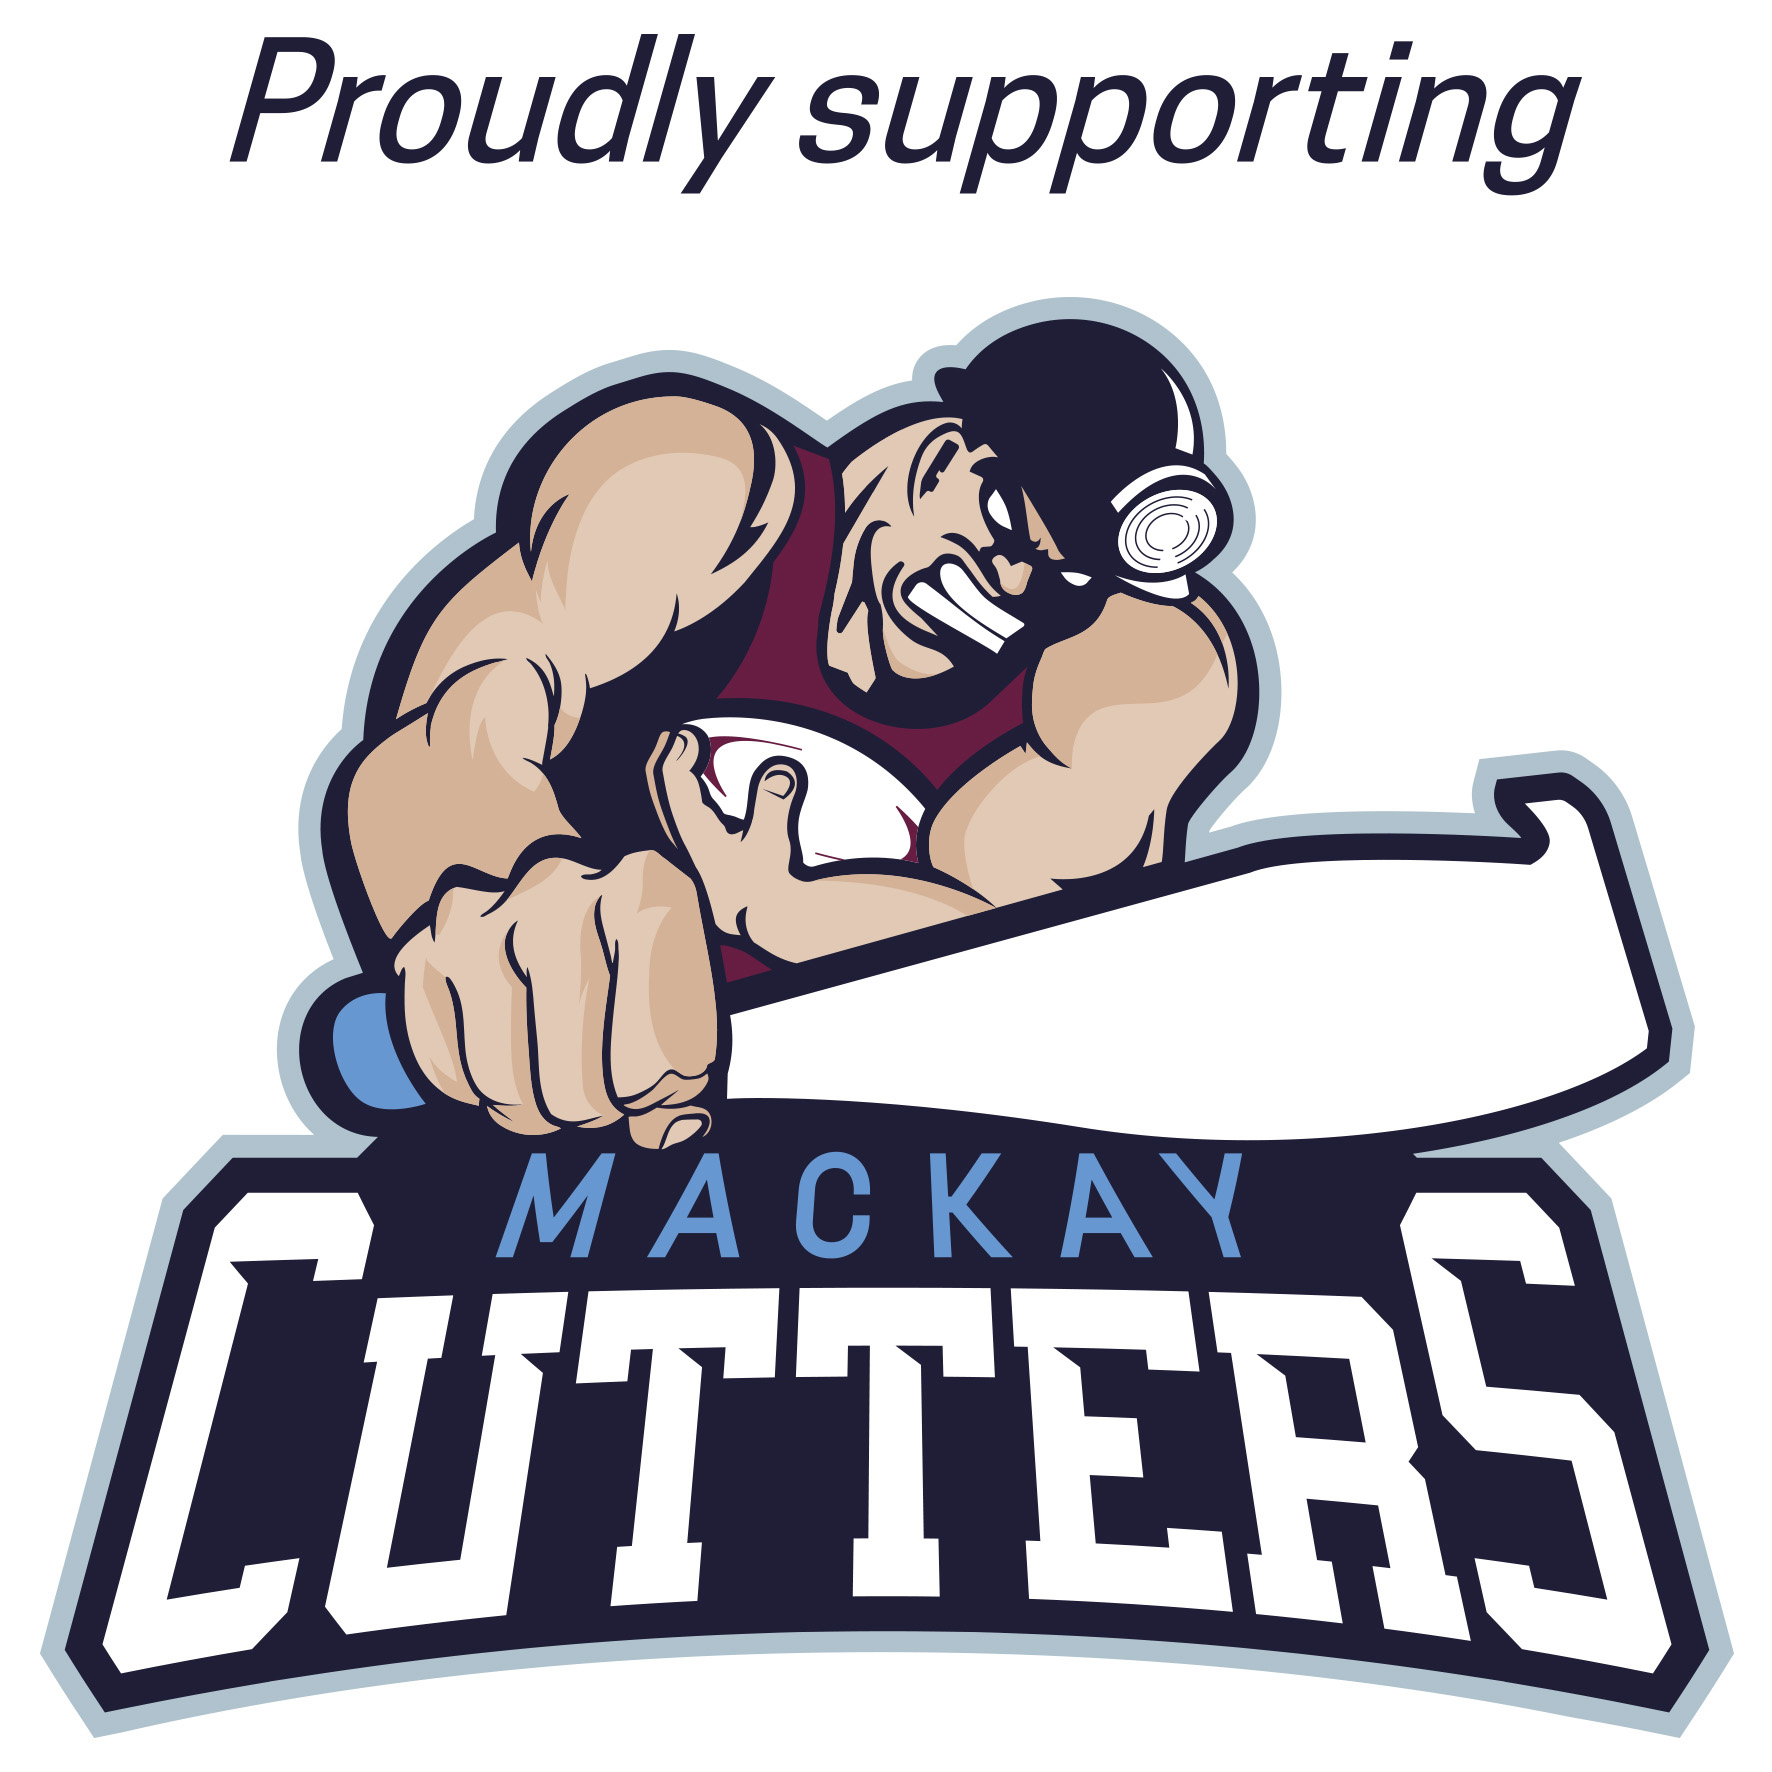 Proudly supporting Mackay Cutters